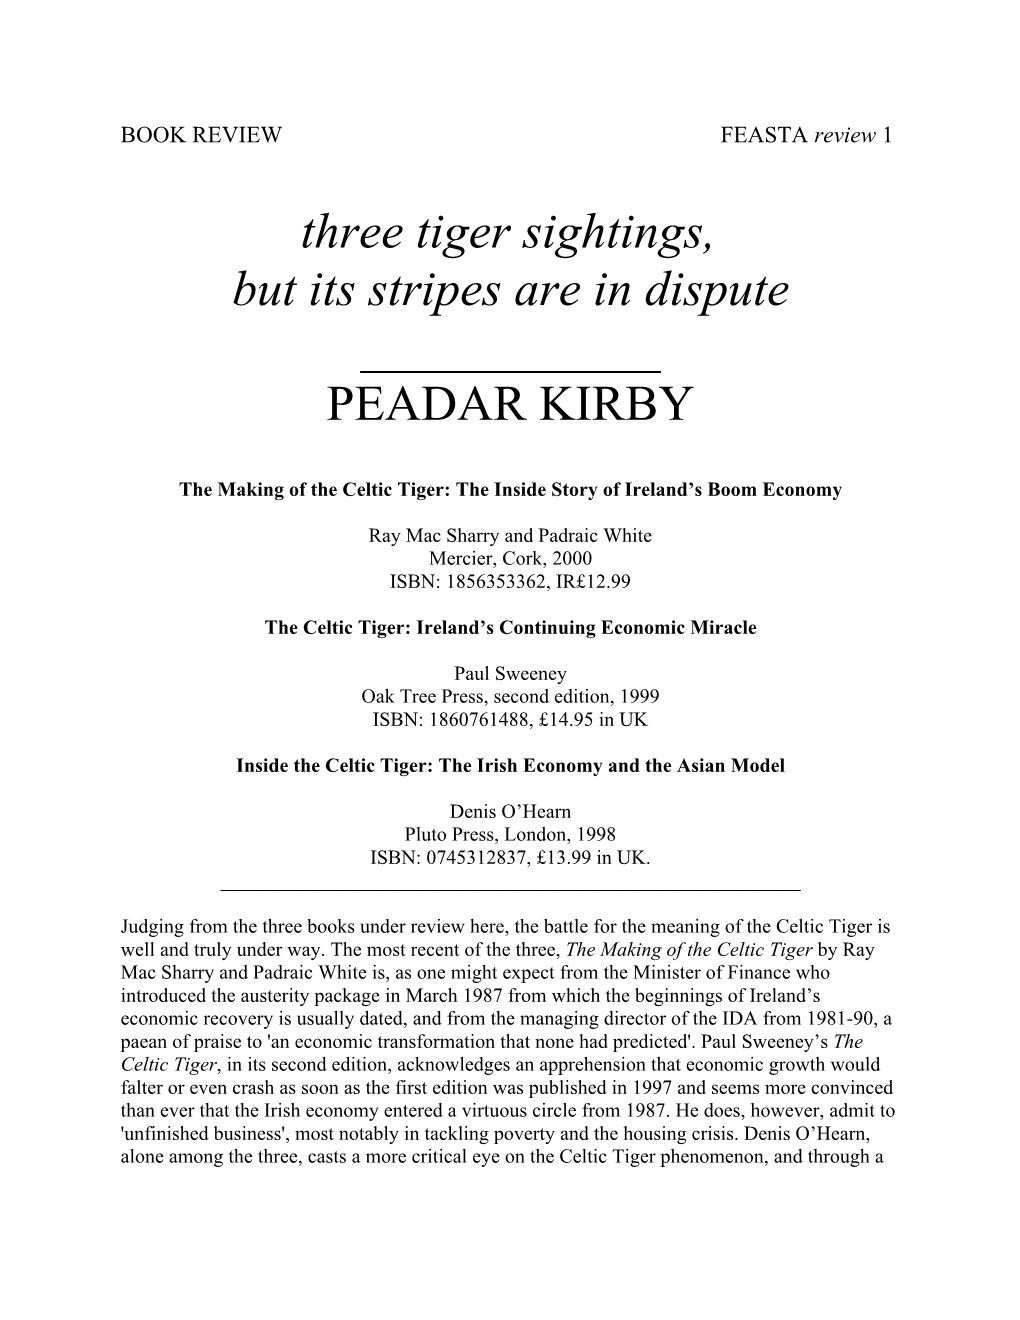 Review of Books About the Celtic Tiger